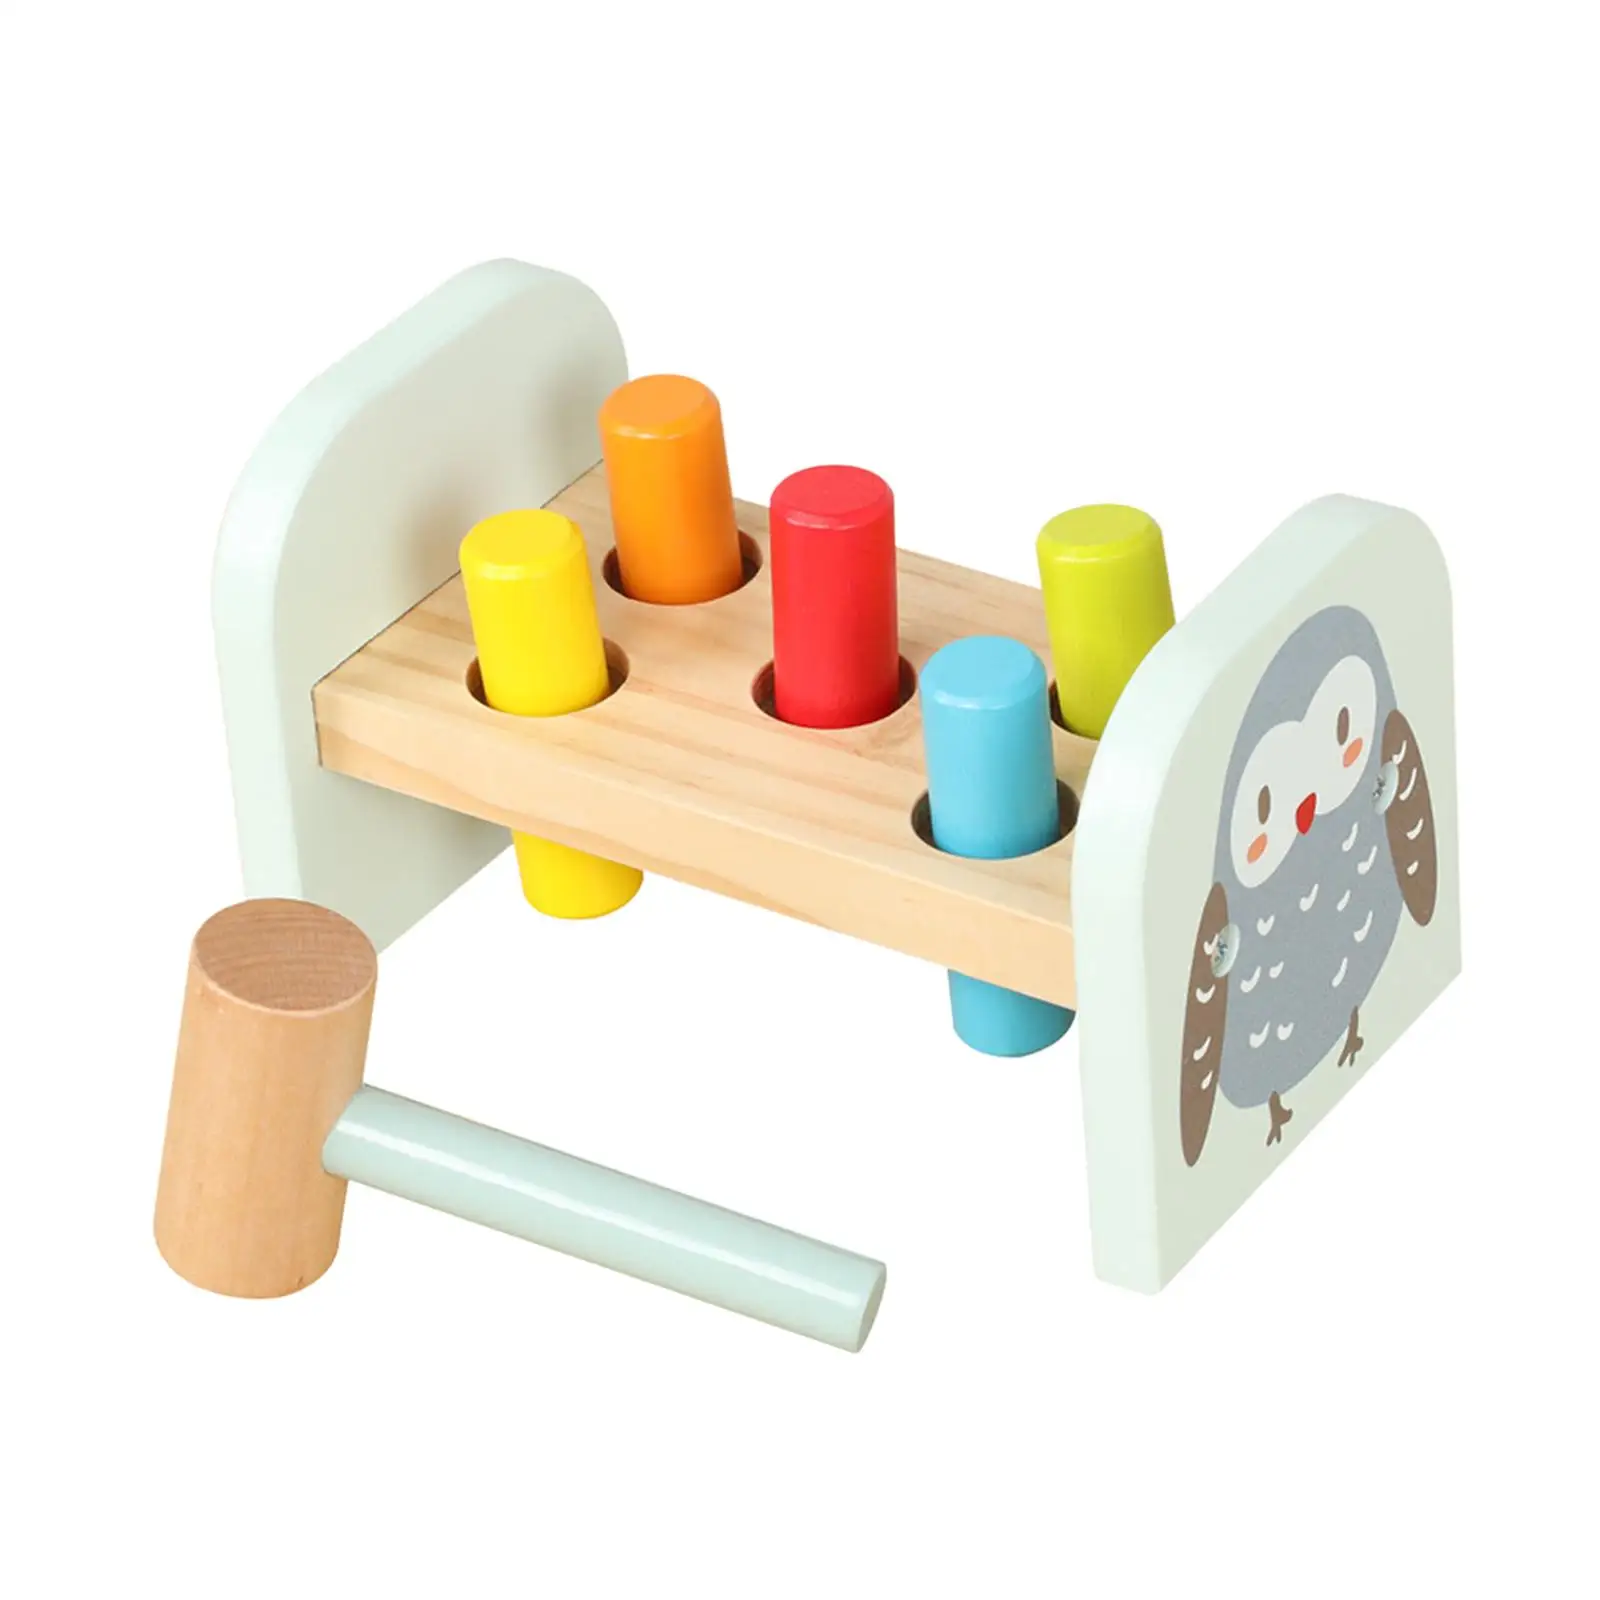 Pounding Bench Wood color Cognitive with Mallet Wooden Pounding Toy for Boys